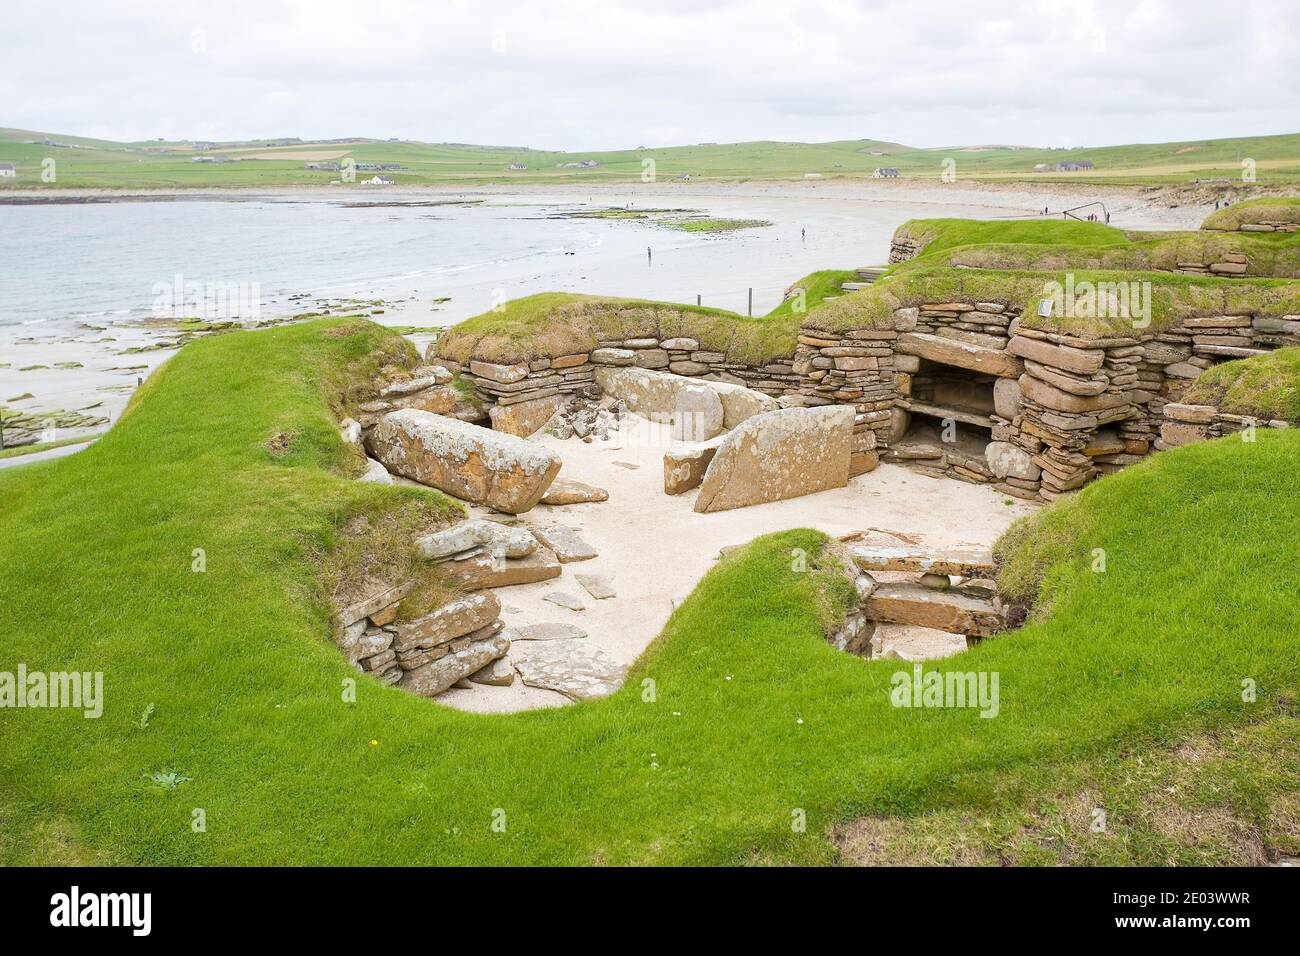 Skara Brae, a stone built Neolithic settlement, located in the Orkney archipelago of Scotland. 3180 BC to 2500 BC. Stock Photo